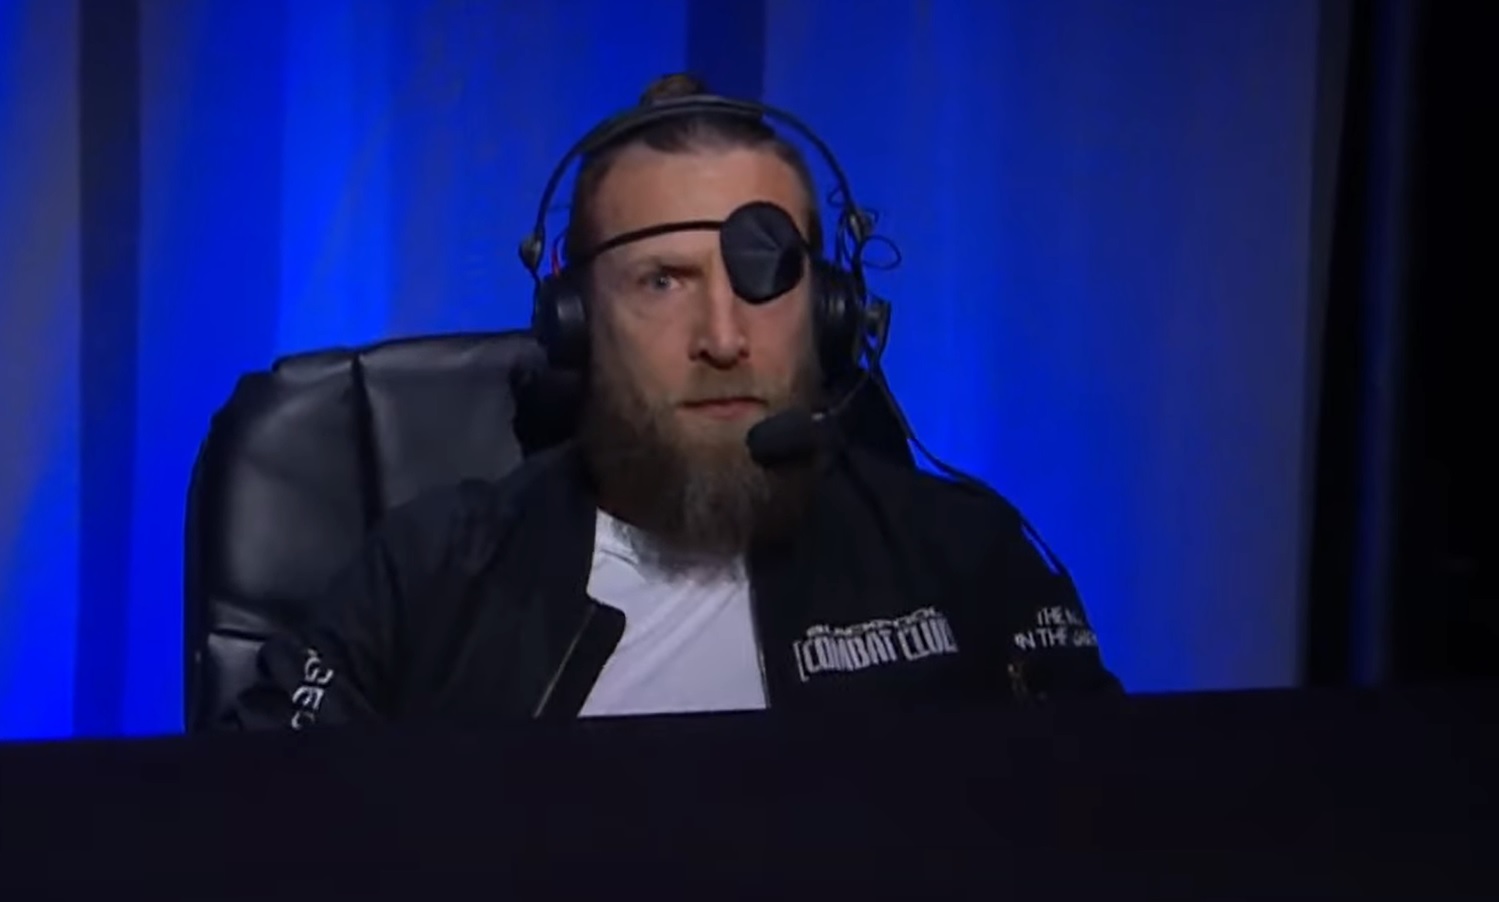 Bryan Danielson To Wear Eye Patch Or Face Mask For AEW In-Ring Return ...